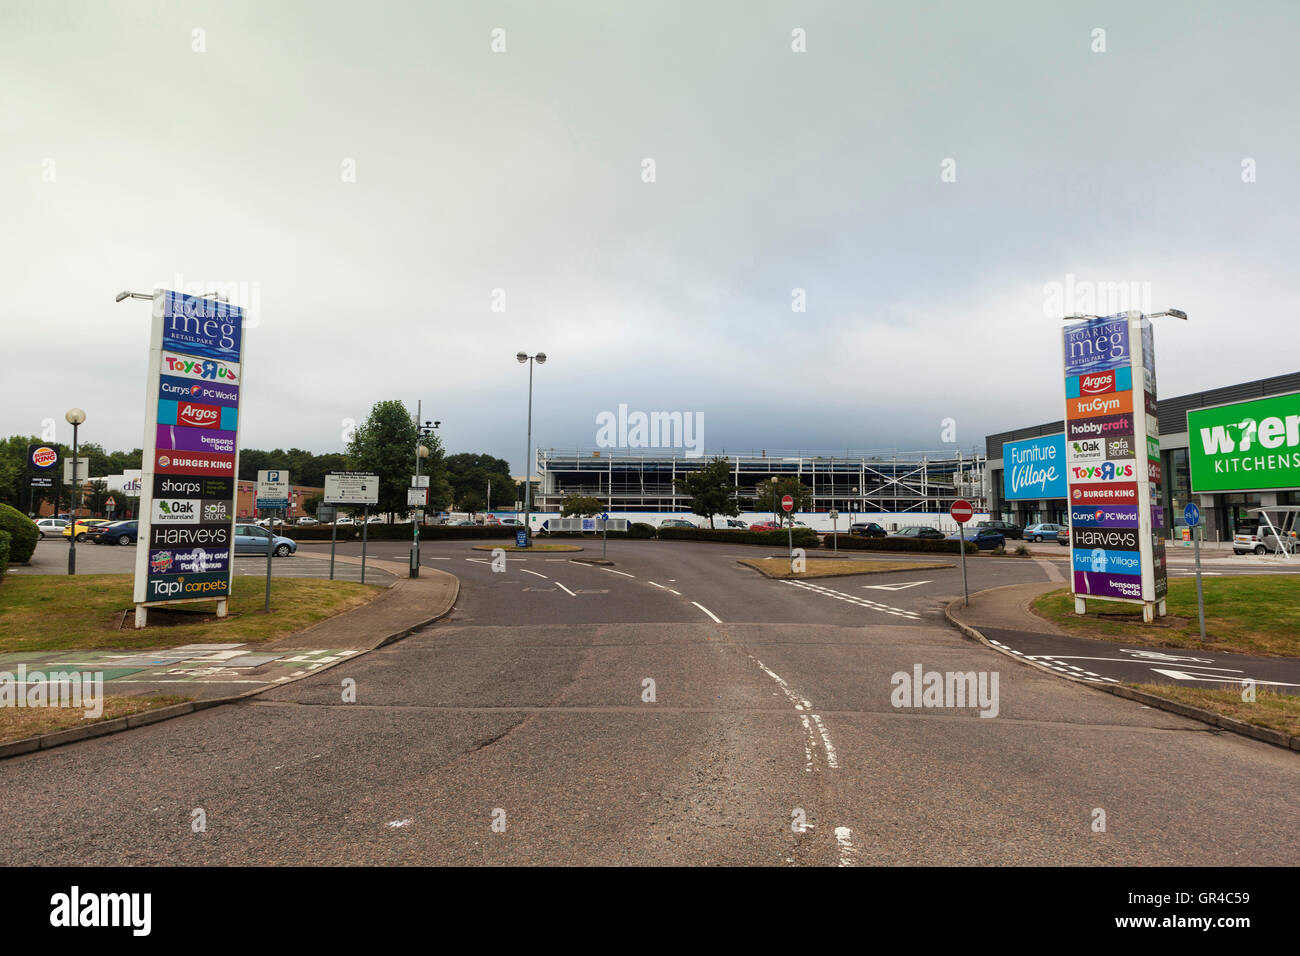 Sign posts of the stores in the Roaring Meg retail park in the beautiful county of Hertfordshire England Stock Photo